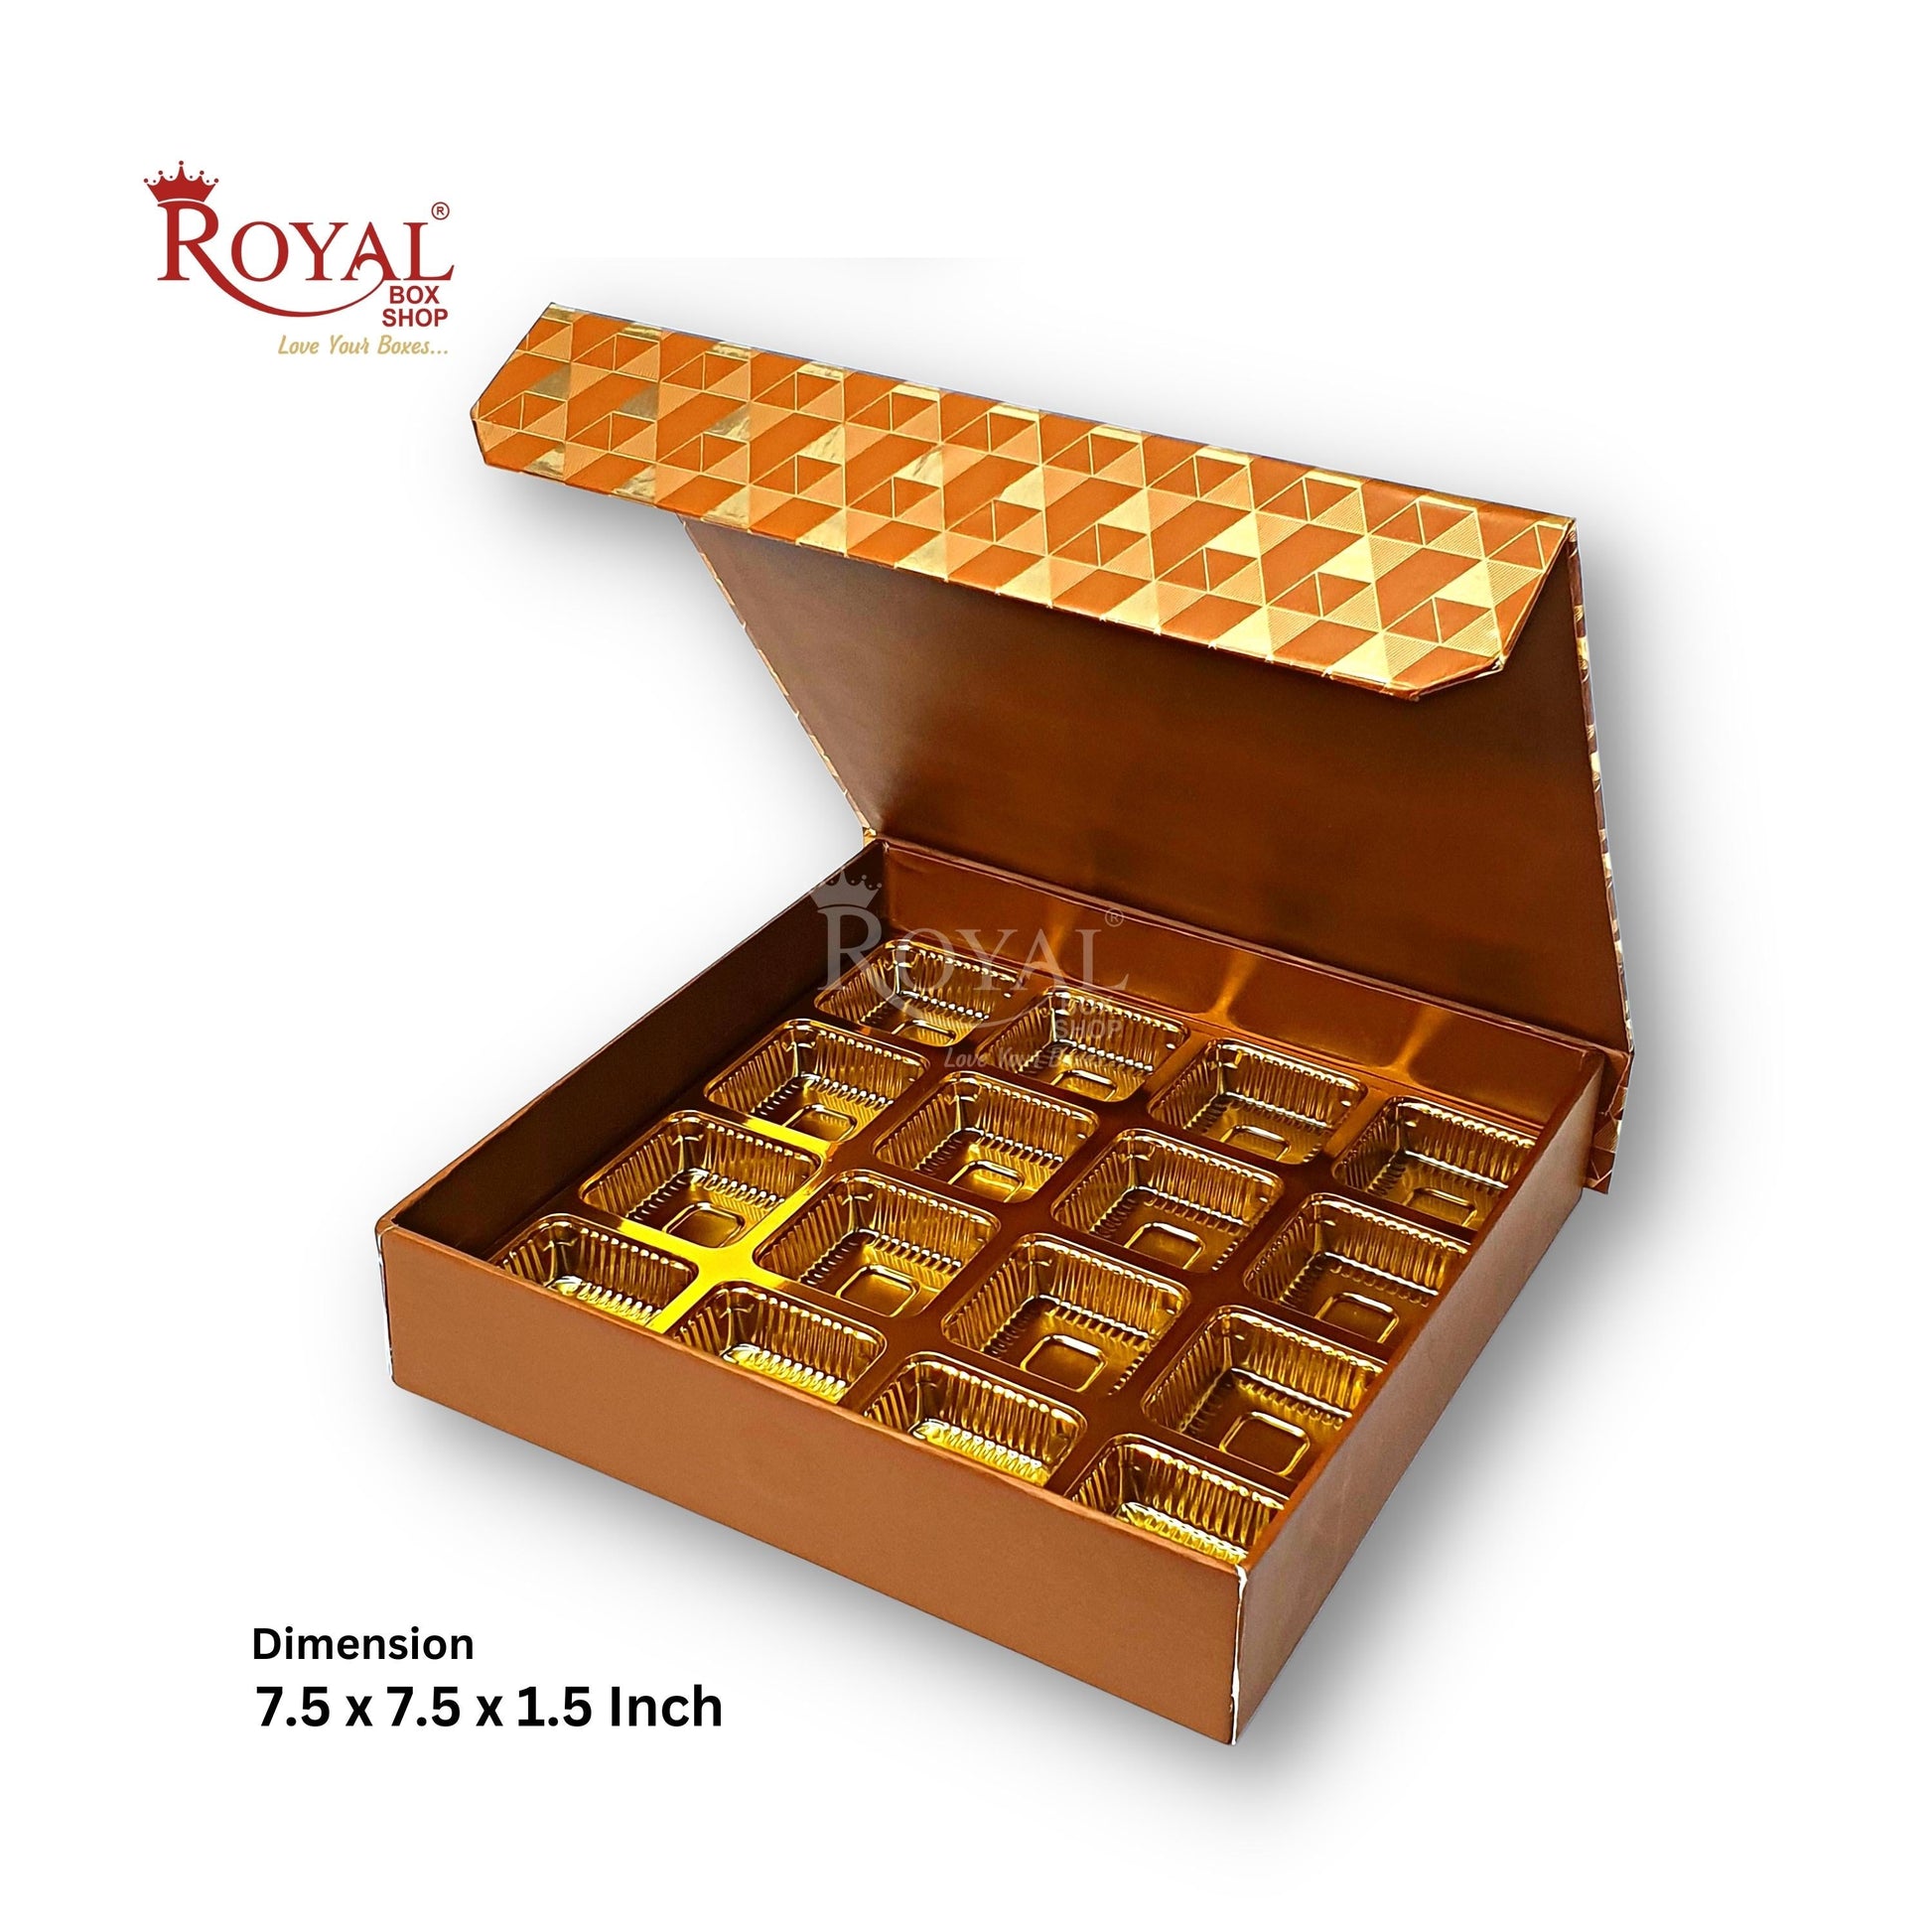 Rigid Chocolate Boxes 16 Cavity With Magnetic Flap I Brown with Gold Foiling I 7.5 X 7.5 X 1.5 Inch I Kappa Boxes Royal Box Shop